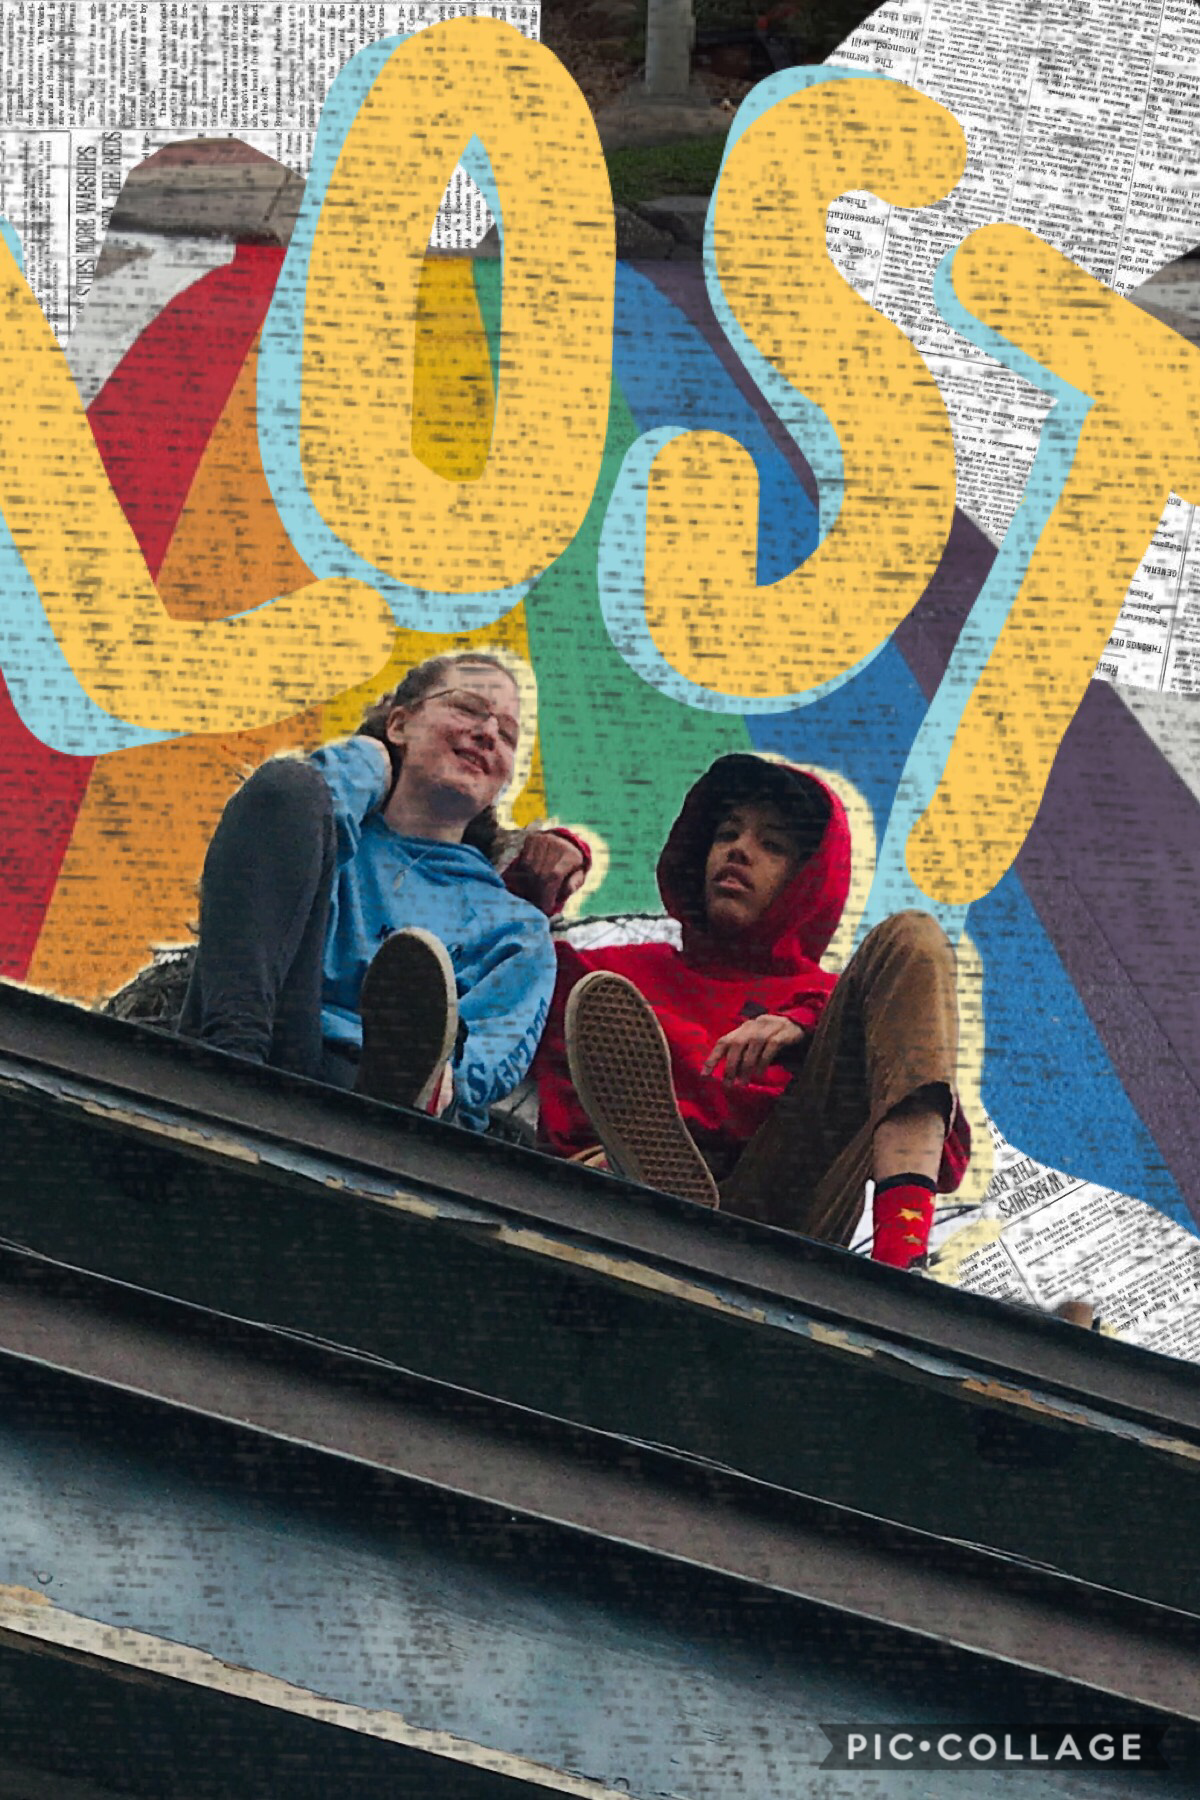 🥖 h e y 🥖
remember how i thought i was leaving pc?
IM BACKKK
here’s a funky edit for y’all 
this is actually a pic of me and my friend sitting on a roof (be safe kidders)
im the red boyyy
👉😎👉
   🦵🦵
